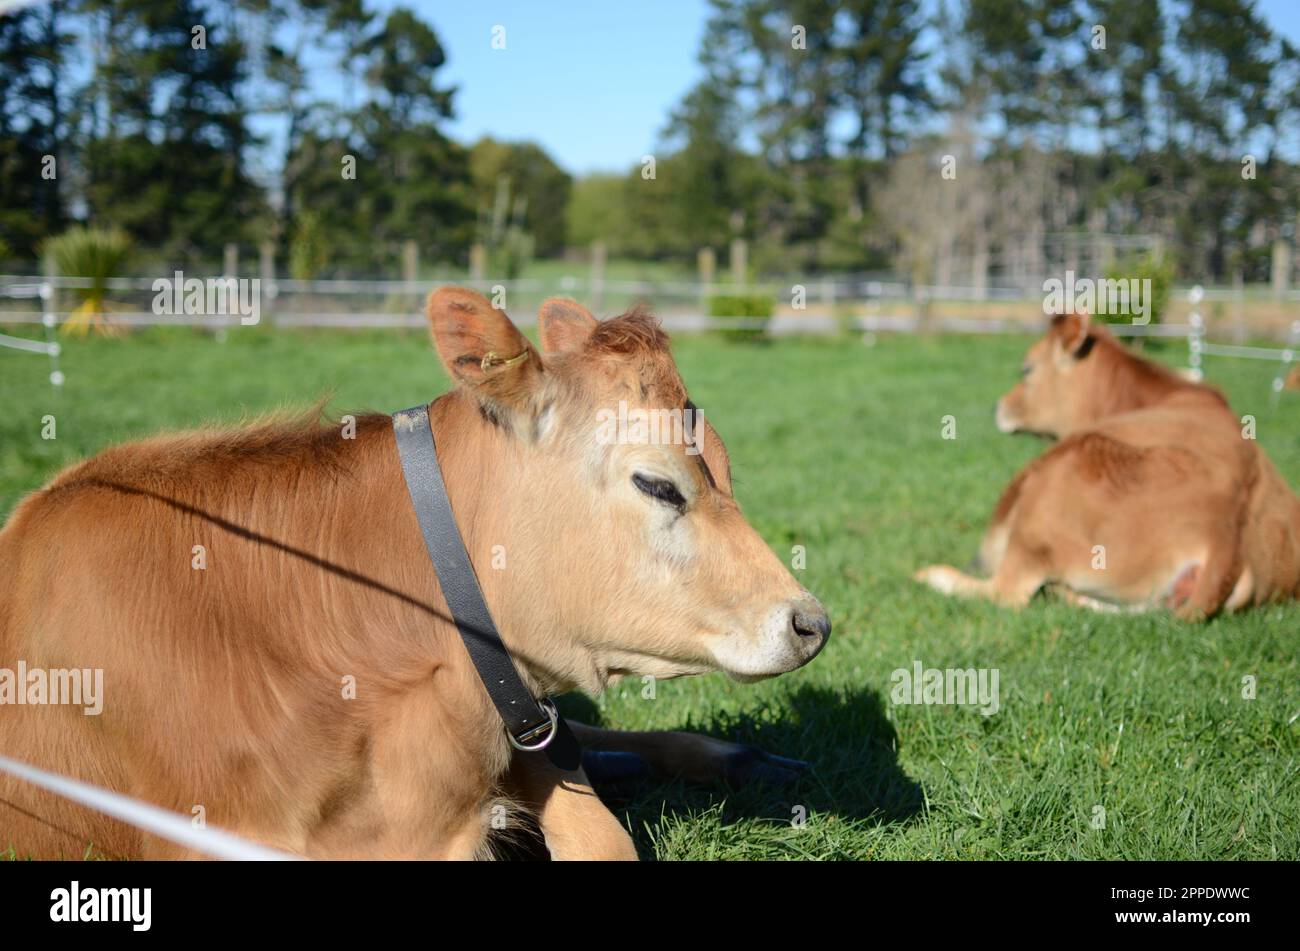 Purebred Jersey Heifer Cows And Calves. Stock Photo